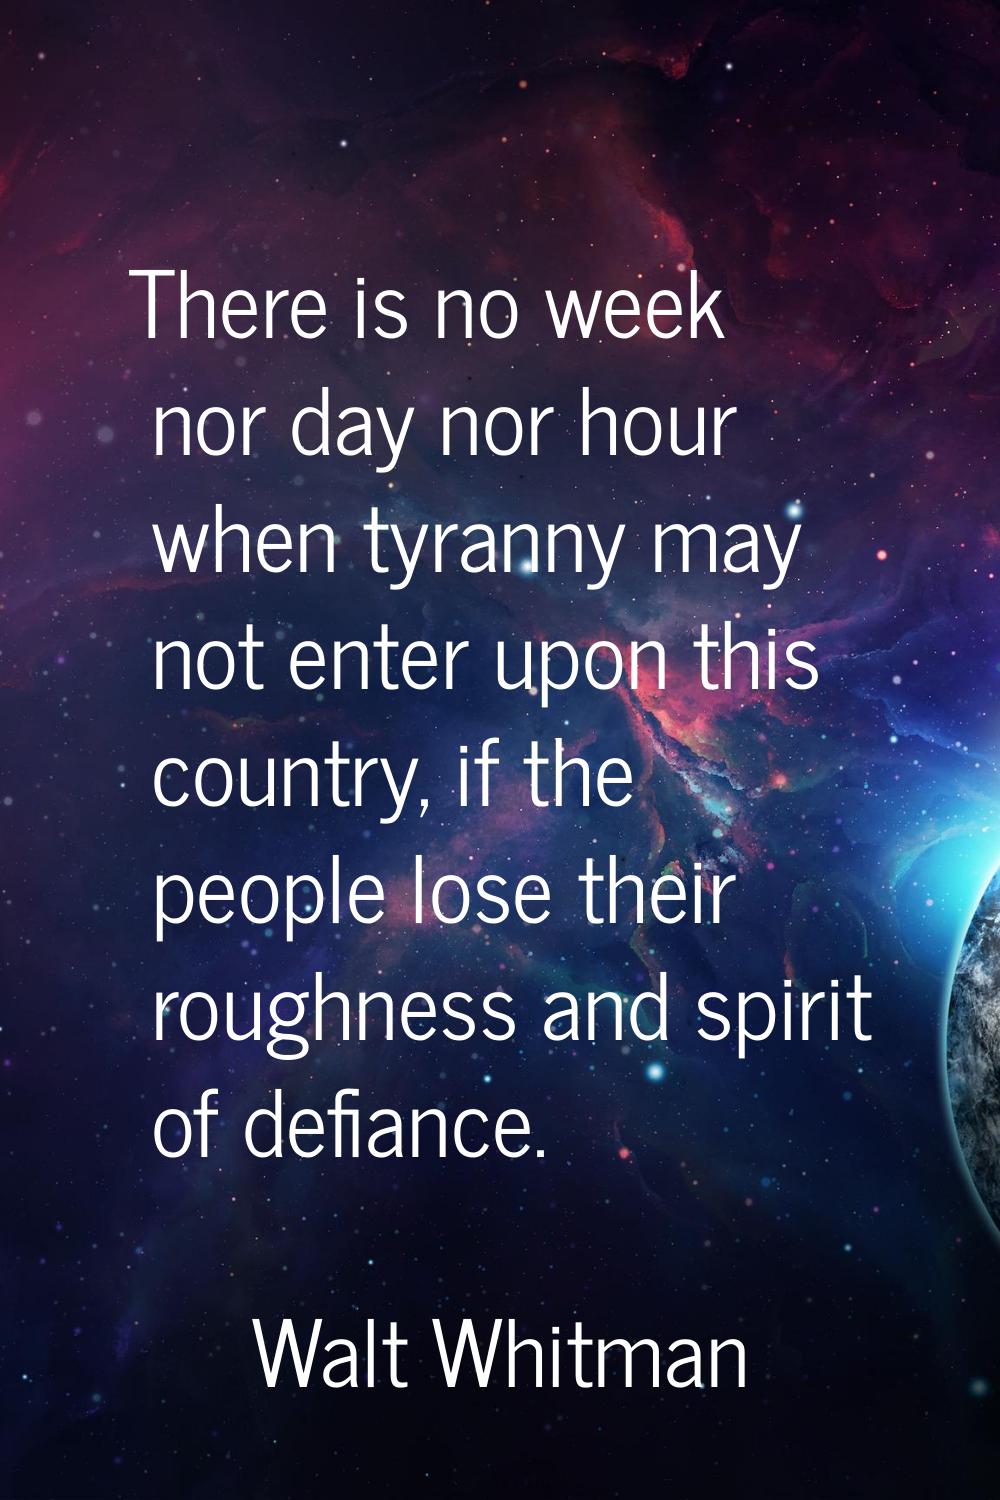 There is no week nor day nor hour when tyranny may not enter upon this country, if the people lose 